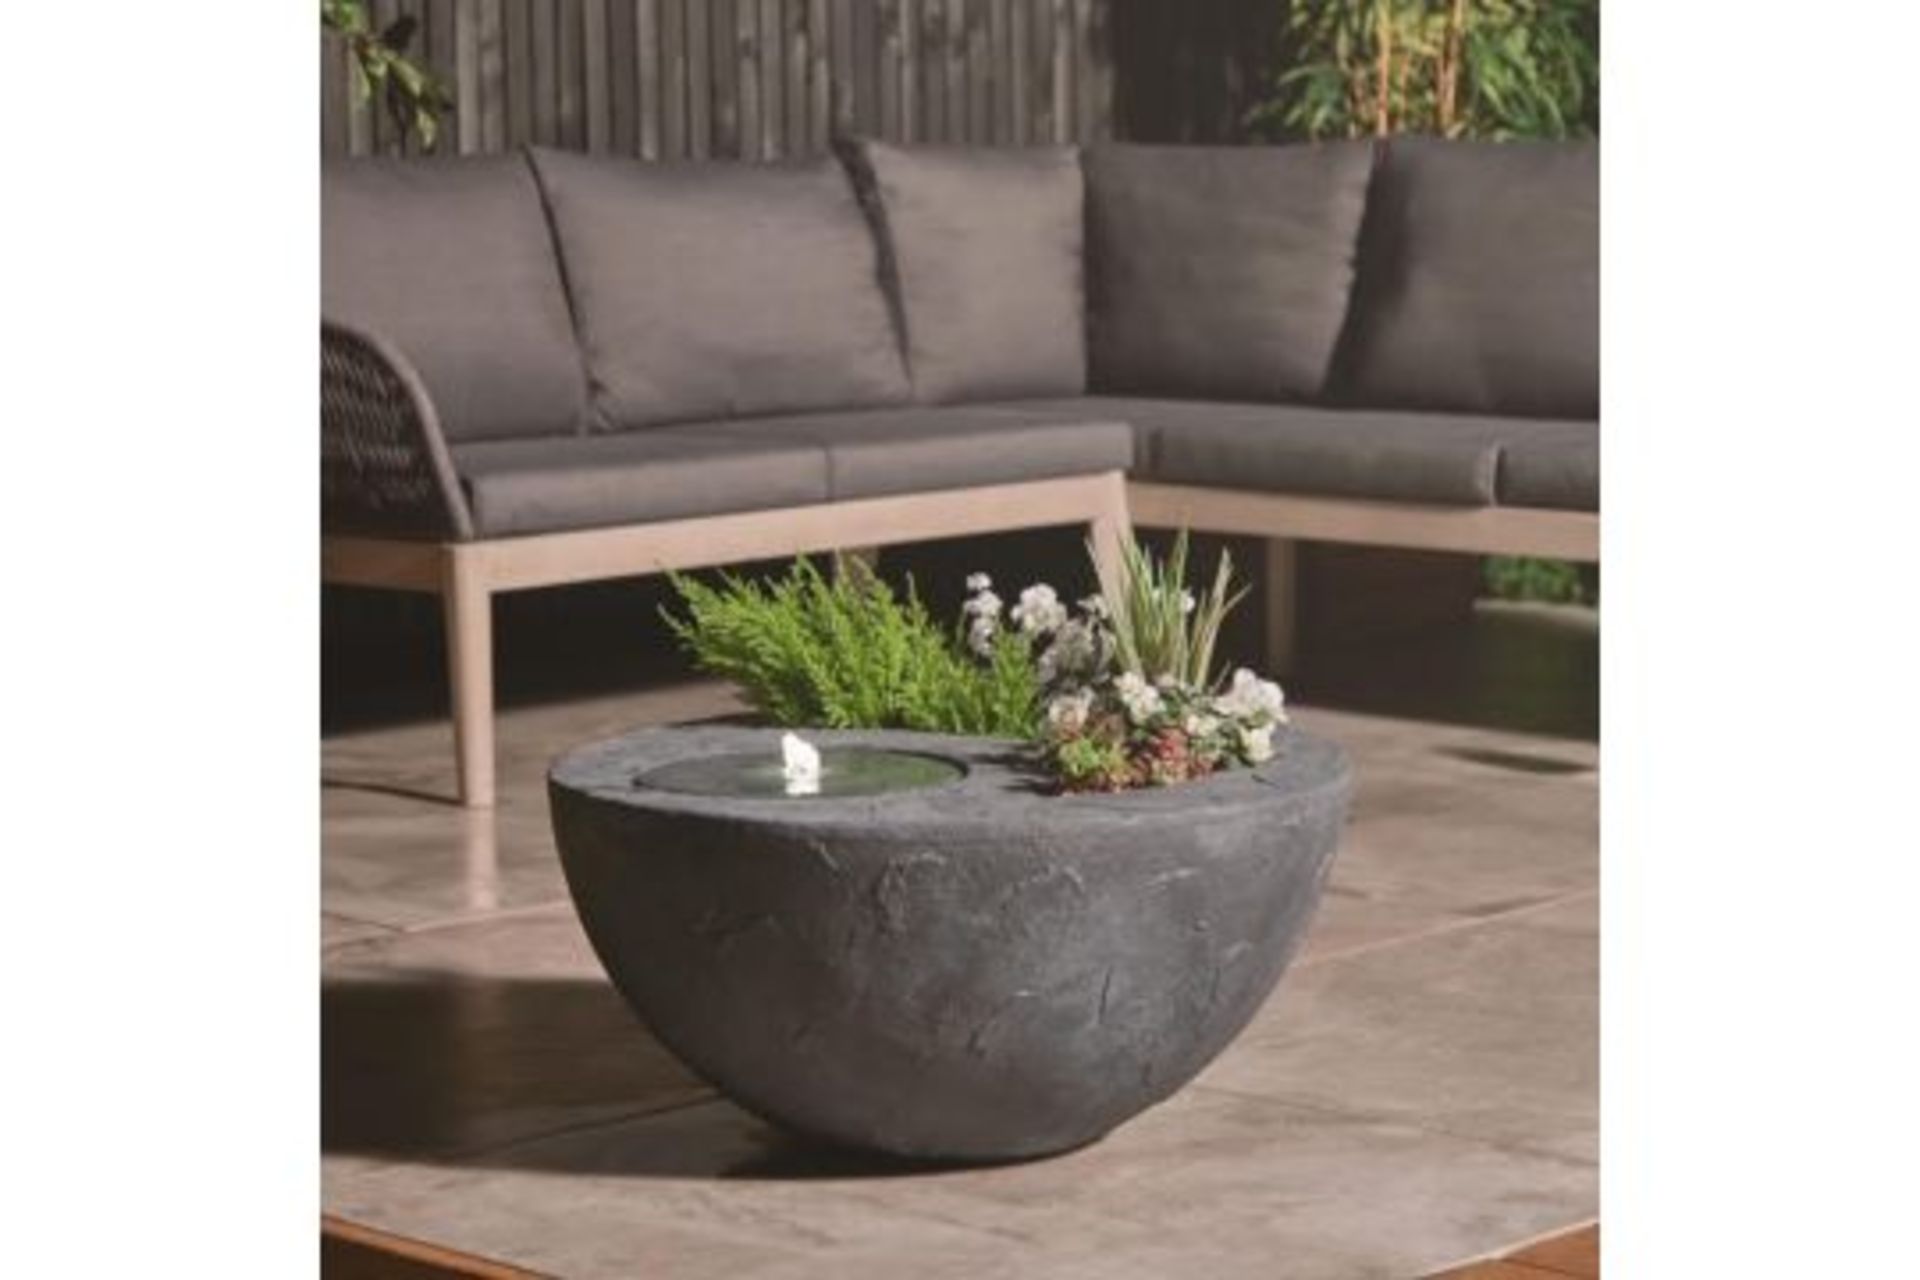 New & Boxed Dual Water Feature and Planter. RRP £299.99 (REF726) - Garden Bowl Design Planter, - Image 3 of 5